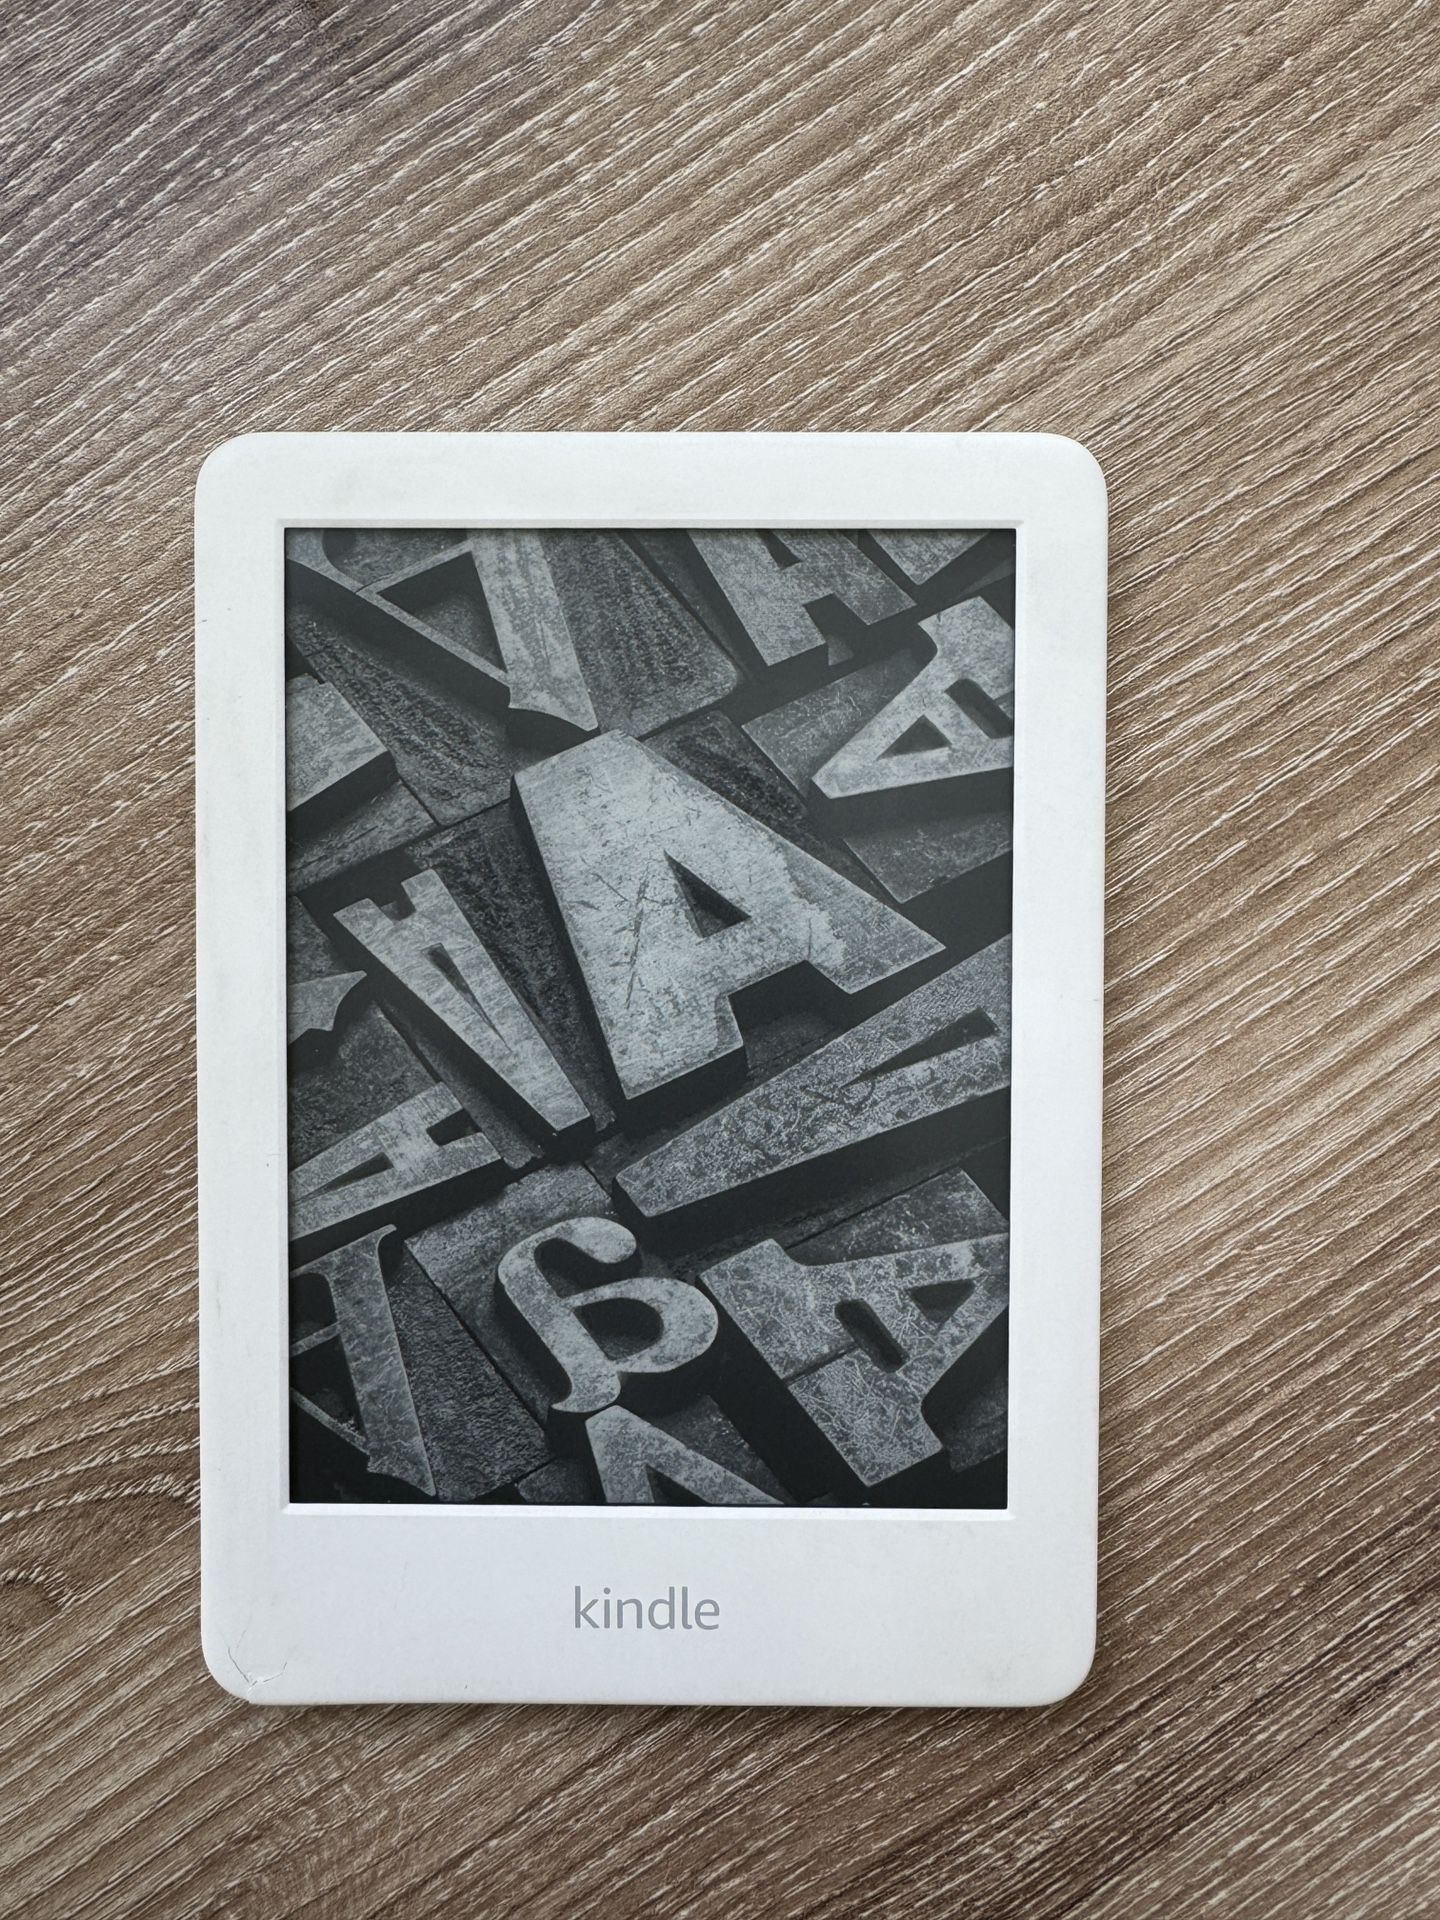 Kindle - 2019 With backlight 